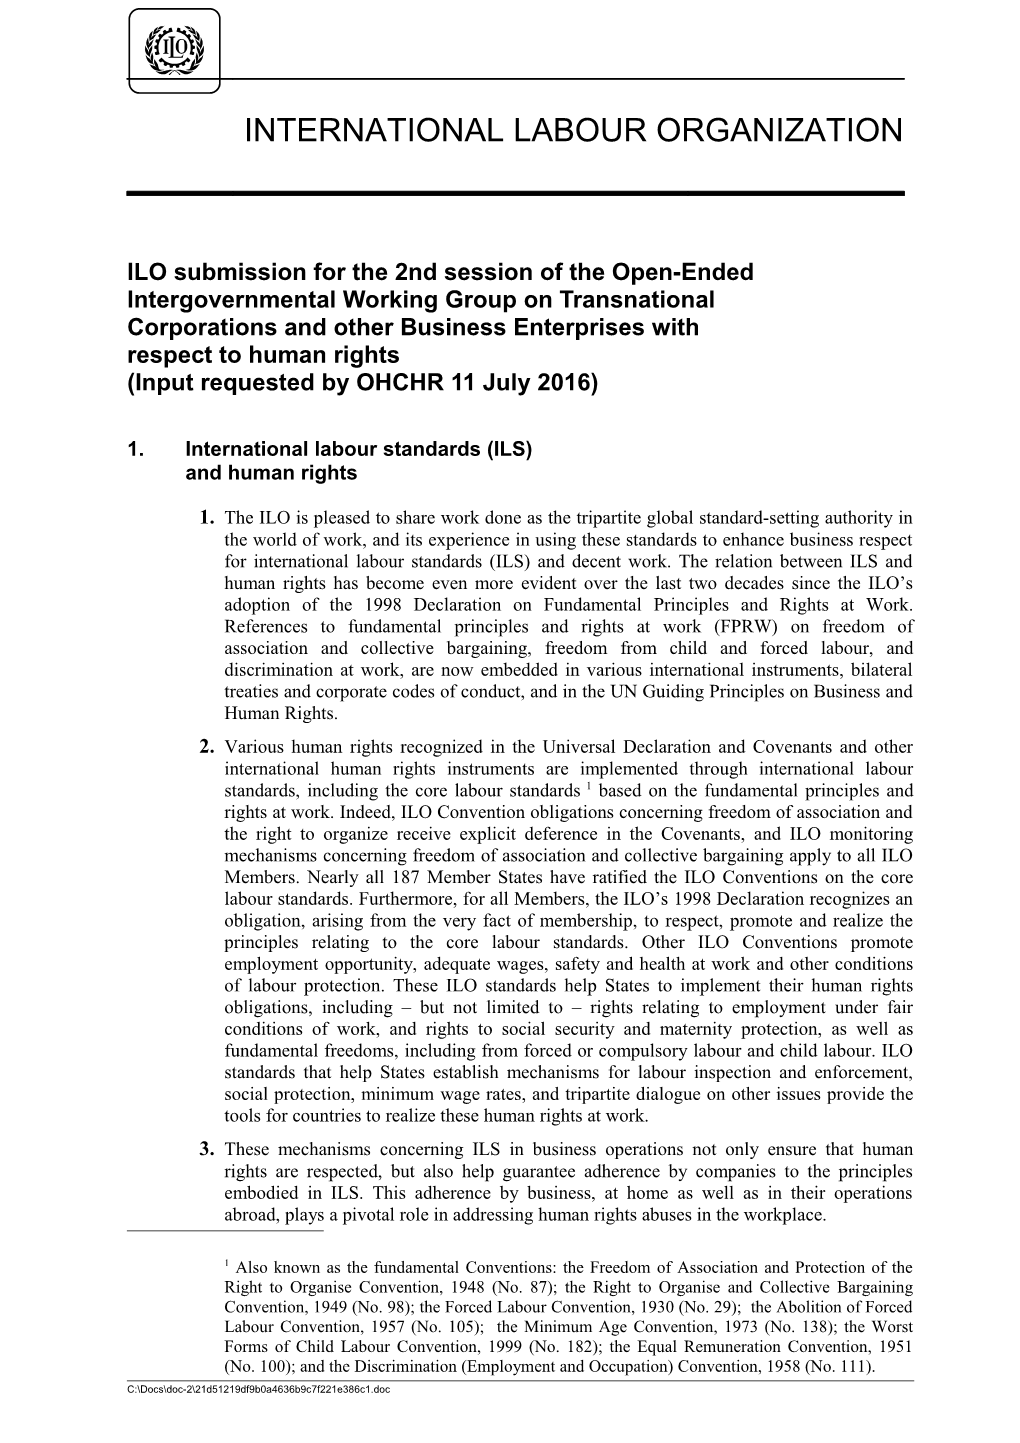 ILO Activities in Support of Implementation of United Nations General Assembly Resolution